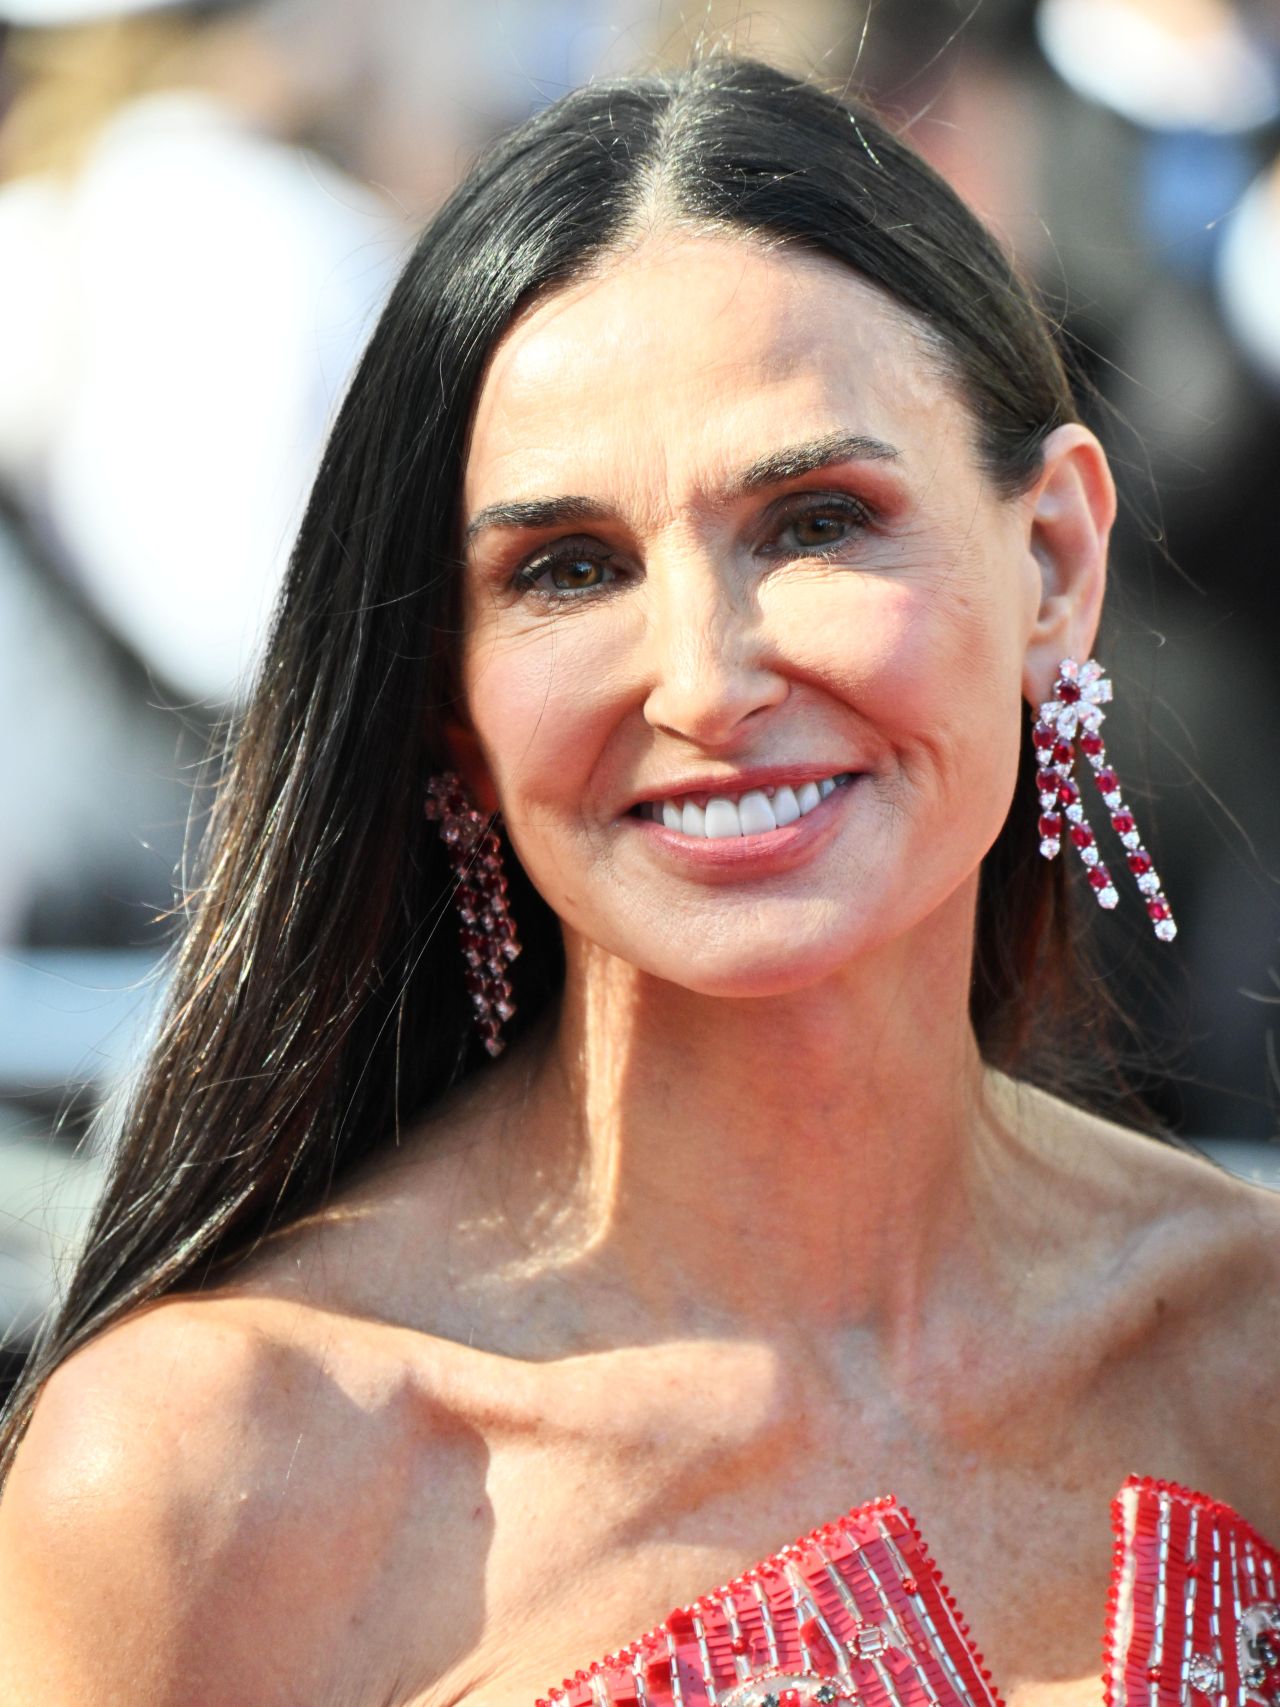 demi-moore-at-kinds-of-kindness-premiere-at-cannes-film-festival-2.jpg